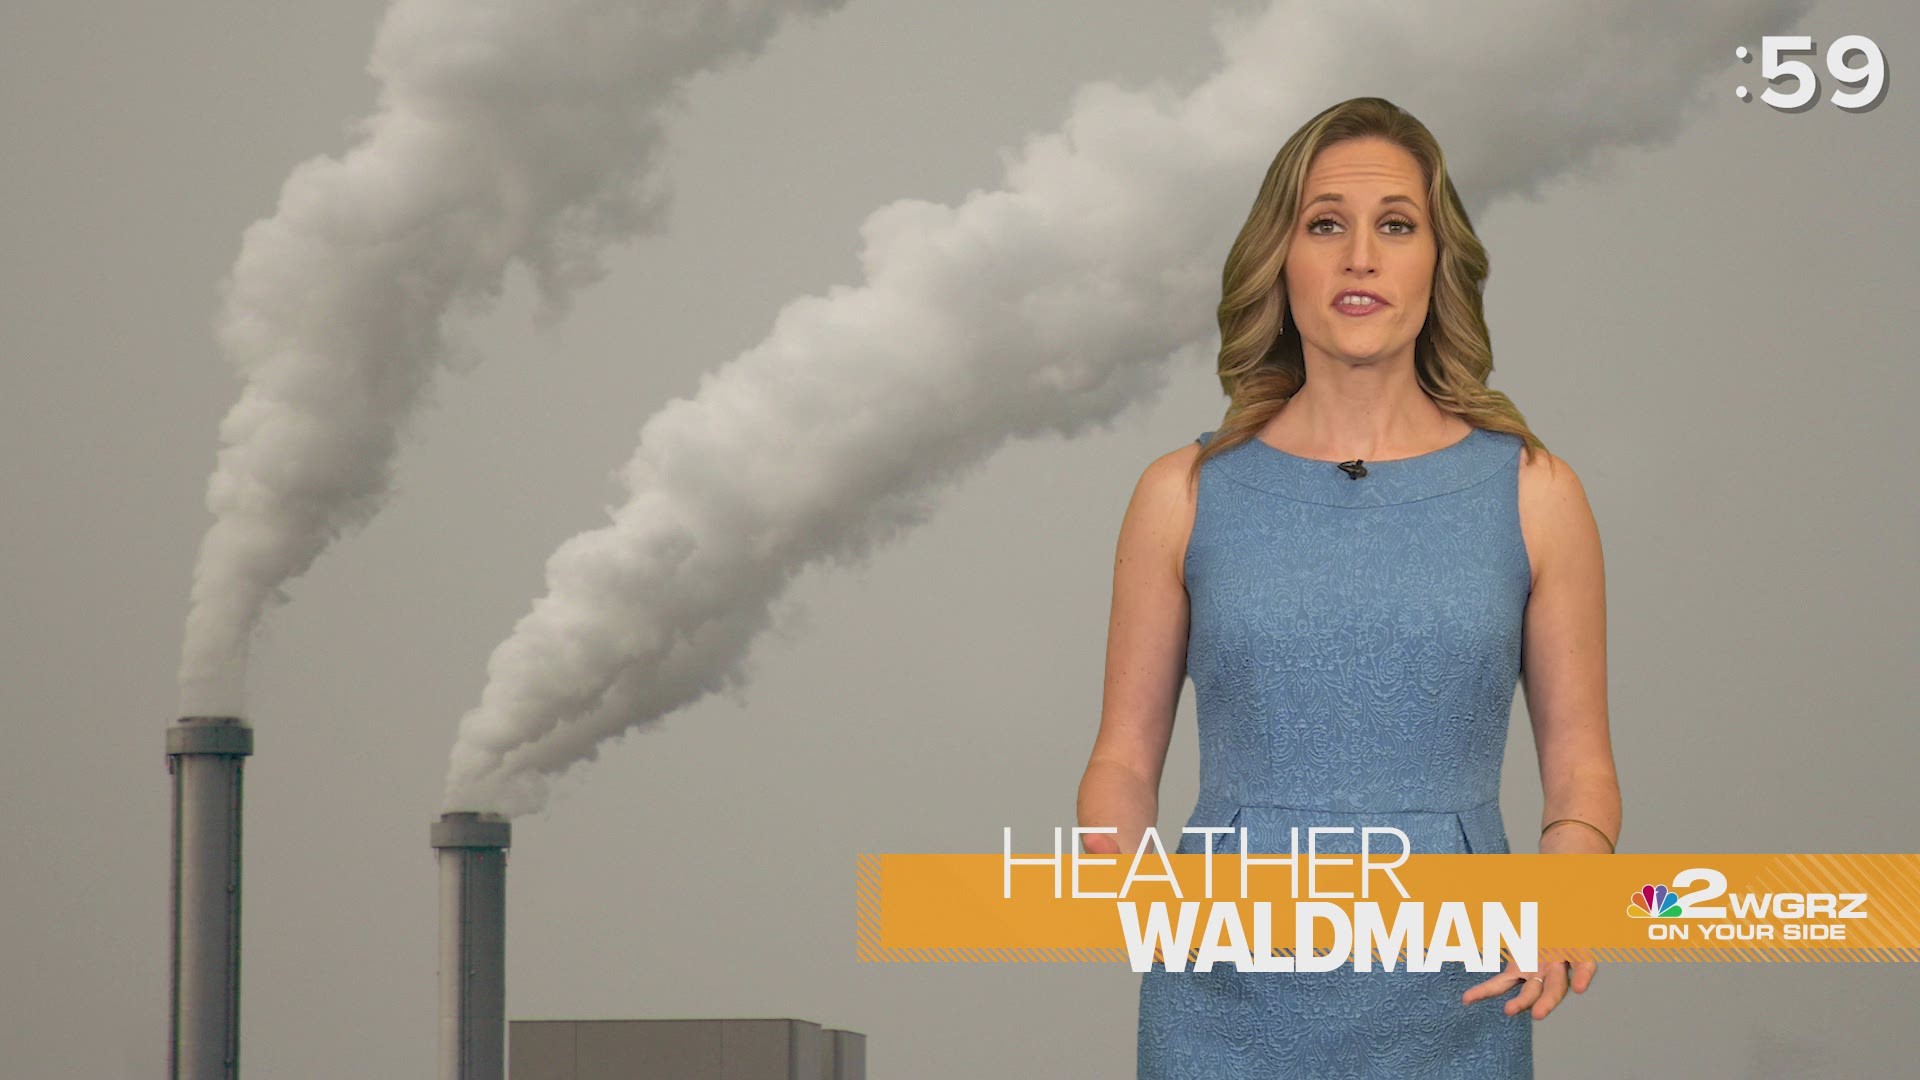 World leaders have been working towards ways to control carbon dioxide concentrations on a
global level but we don’t need to wait for new laws to start making a difference.  In episode five of the Climate Minute, Storm Team 2's Heather Waldman explains that we can all take
actions to reduce what’s called our “carbon footprint”.